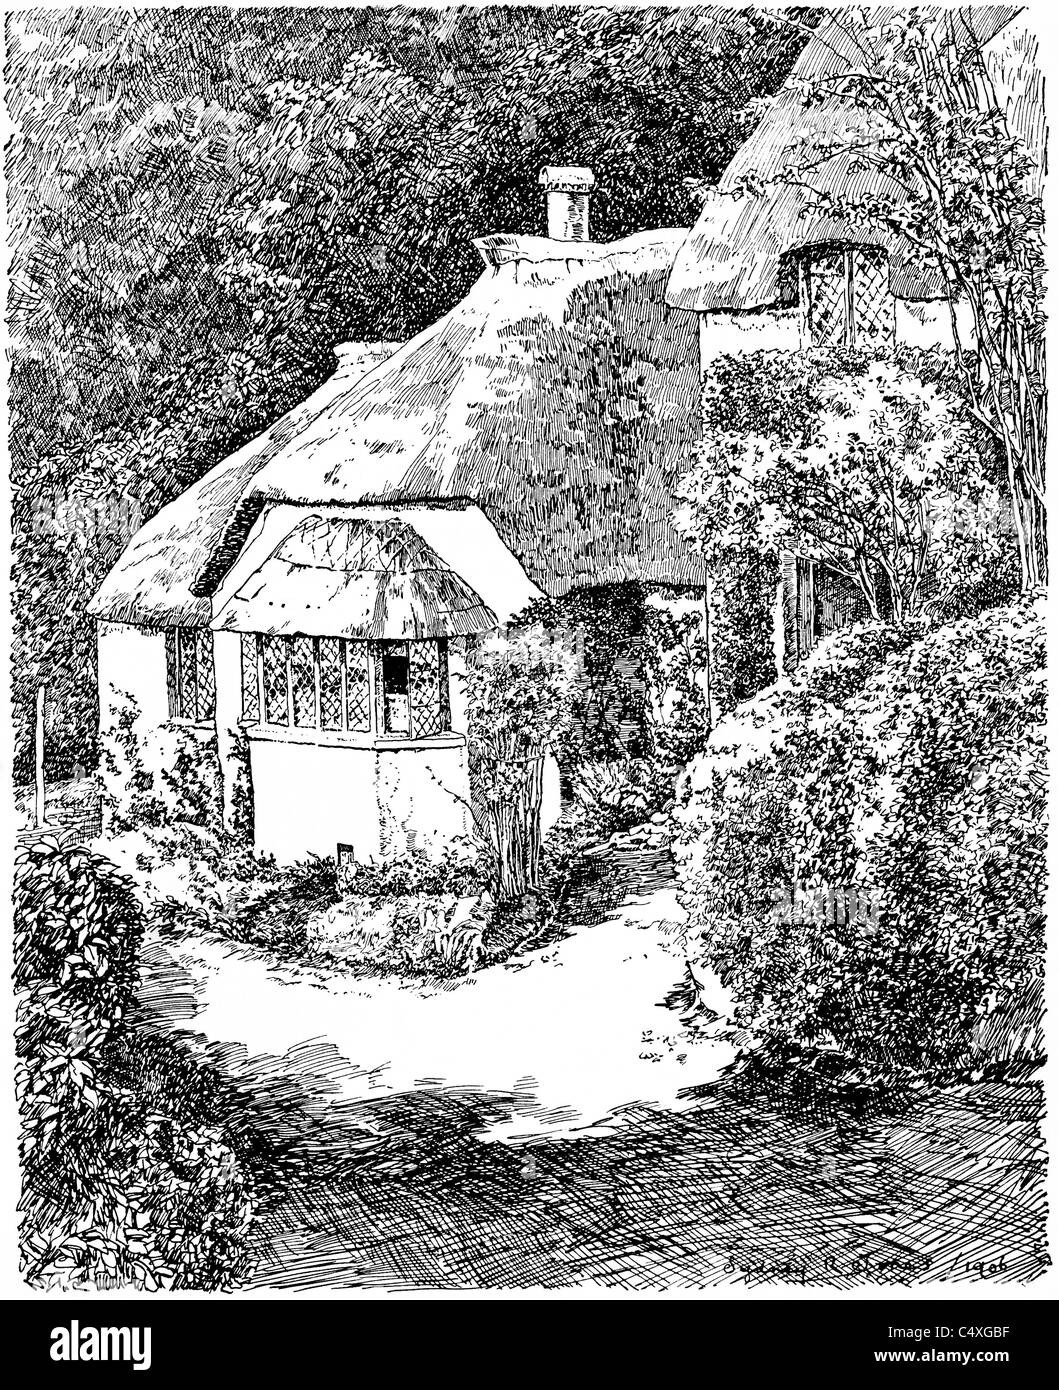 Selworthy, Somerset - pen and ink illustration from 'Old English Country Cottages' by Charles Holme, 1906. Stock Photo